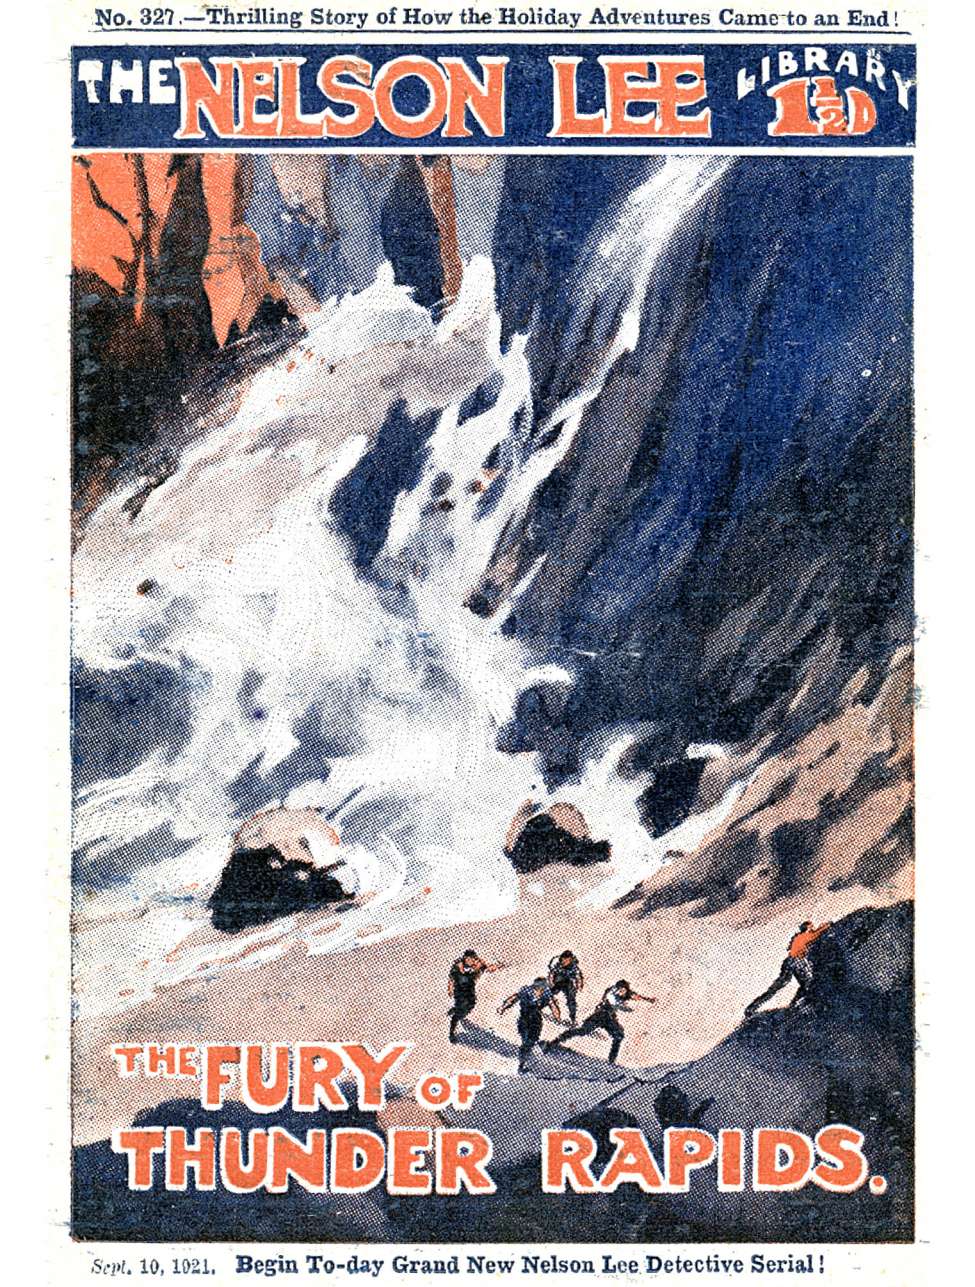 Book Cover For Nelson Lee Library s1 327 - The Fury of Thunder Rapids